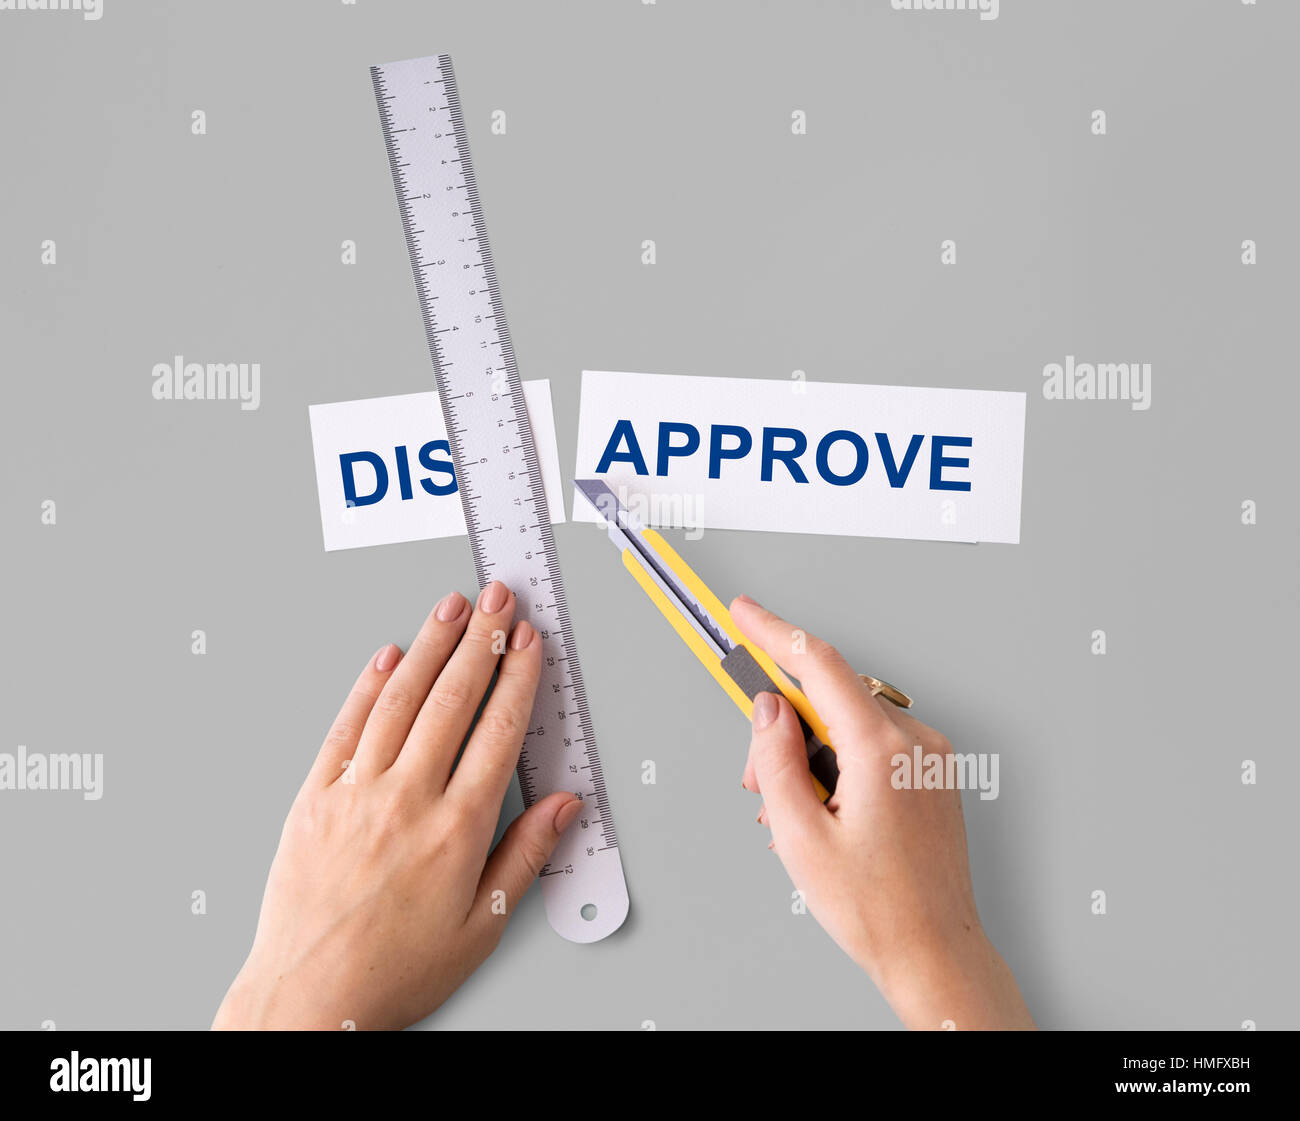 Disapprove Hand Cut Word Split Concept Stock Photo